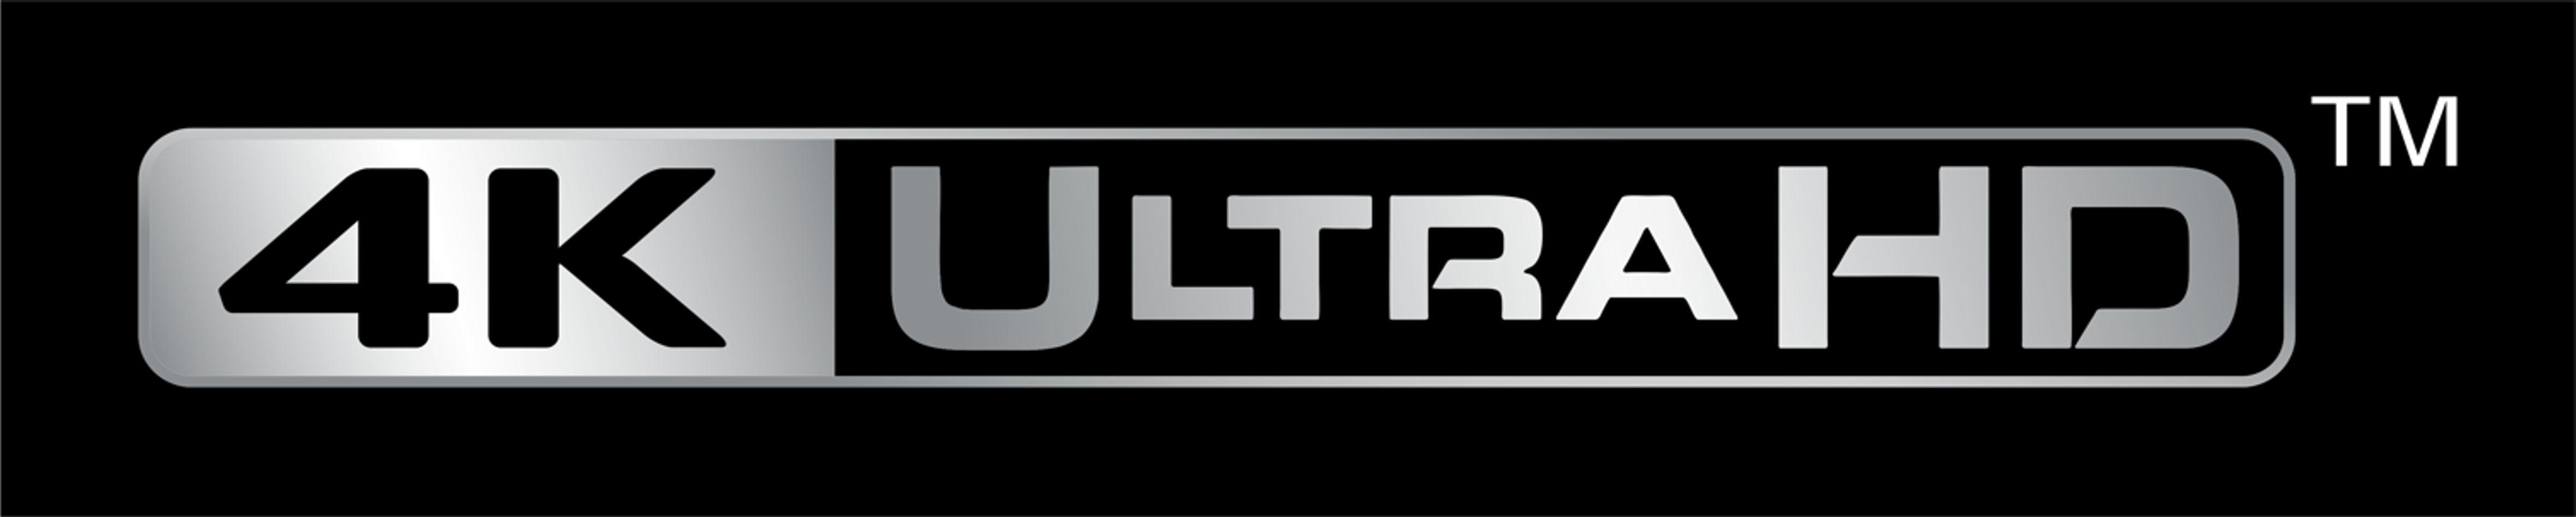 0 Result Images of 4k Ultra Hd Logo Download - PNG Image Collection